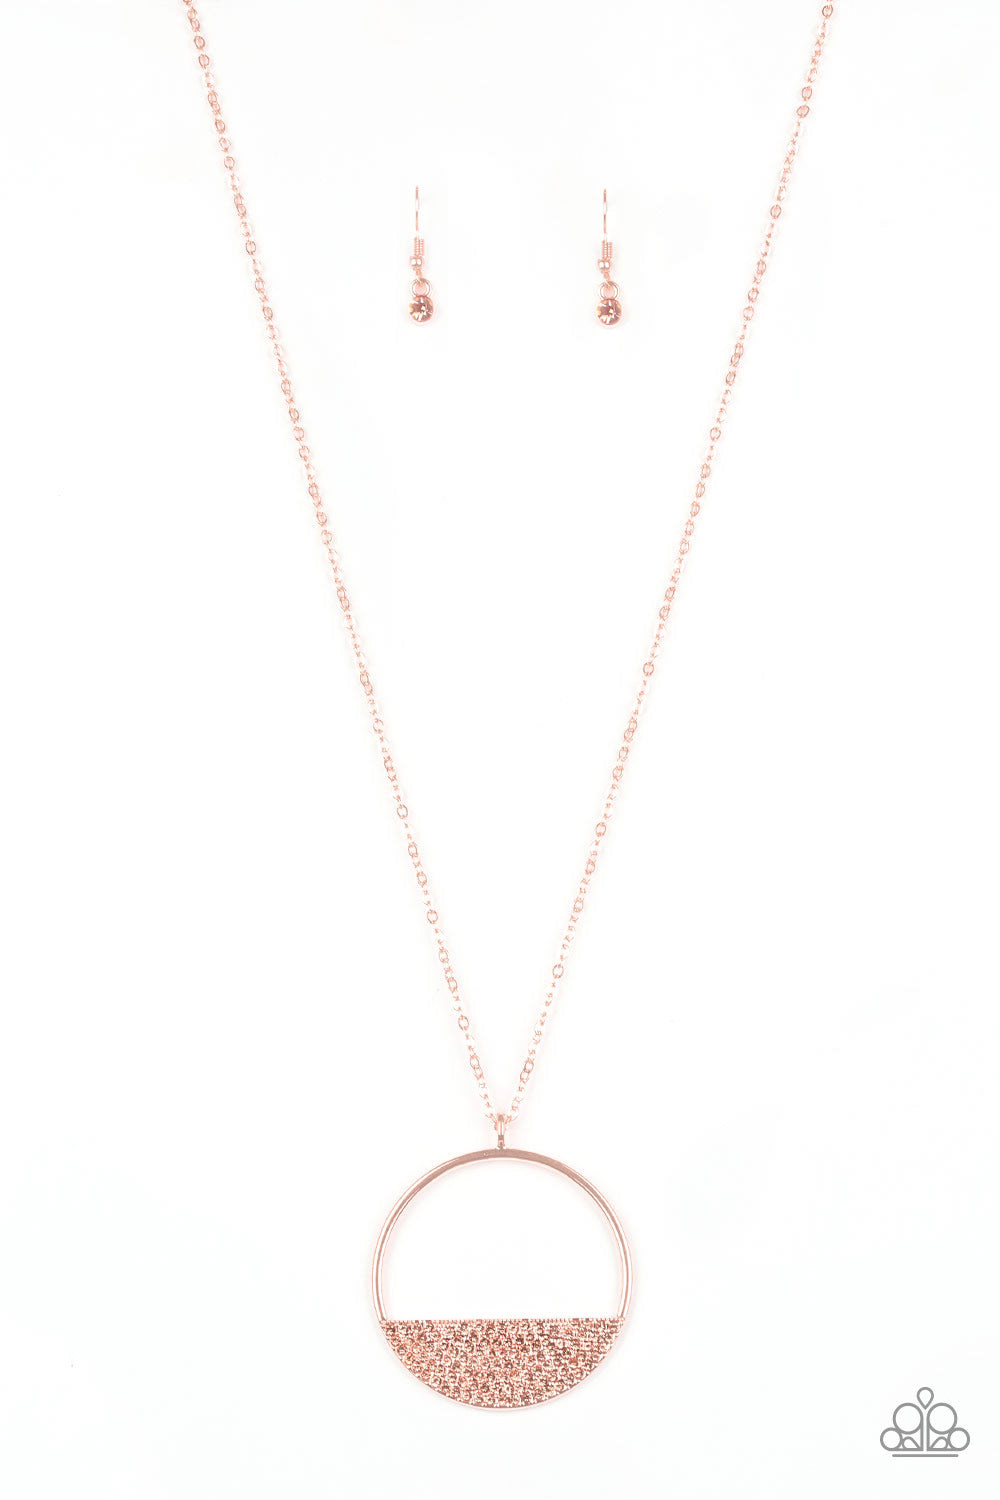 Paparazzi Bet Your Bottom Dollar Copper Long Necklace - P2RE-CPSH-144XX